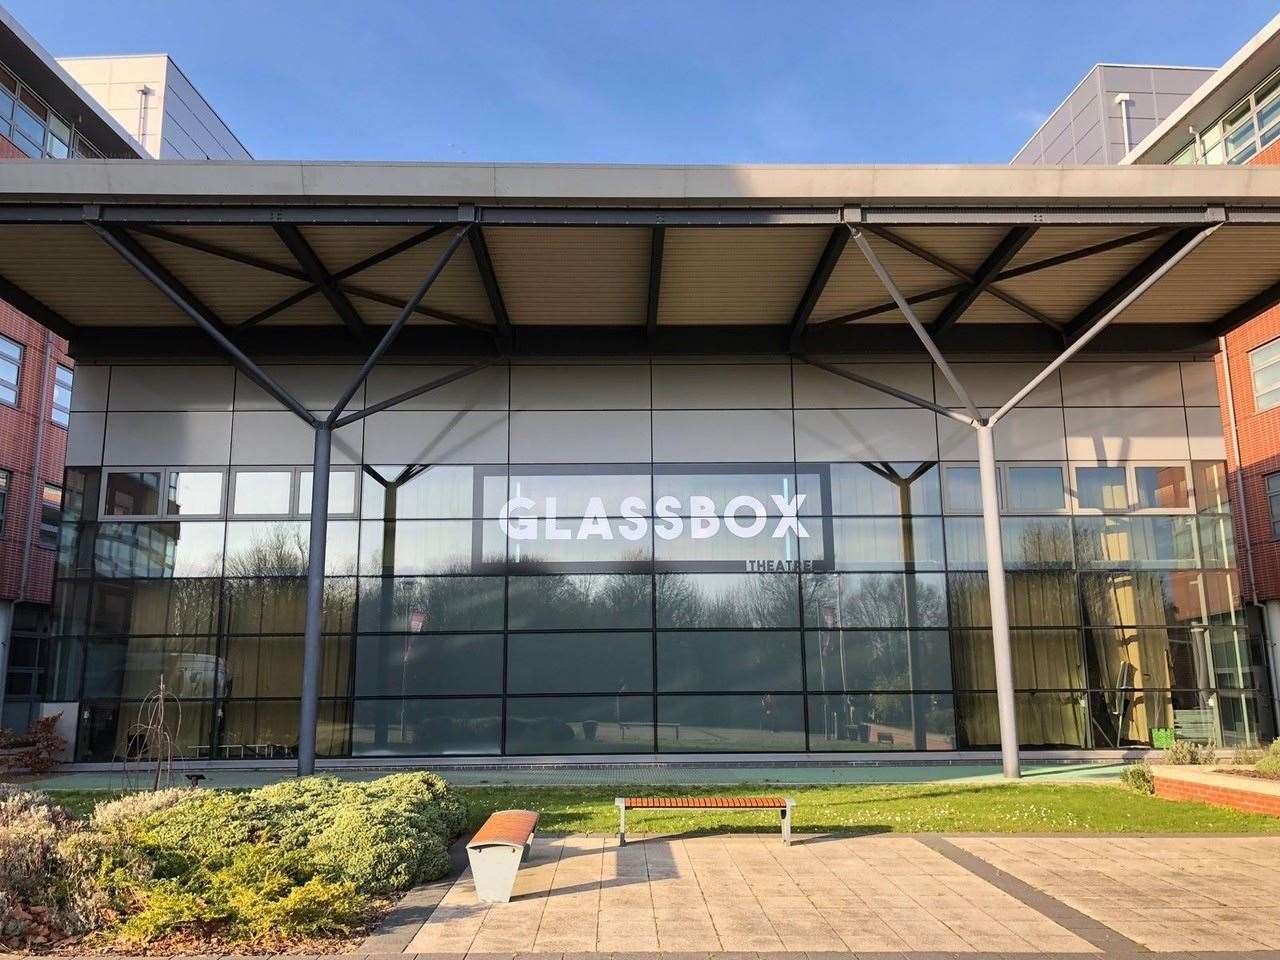 GlassBox Theatre in Medway